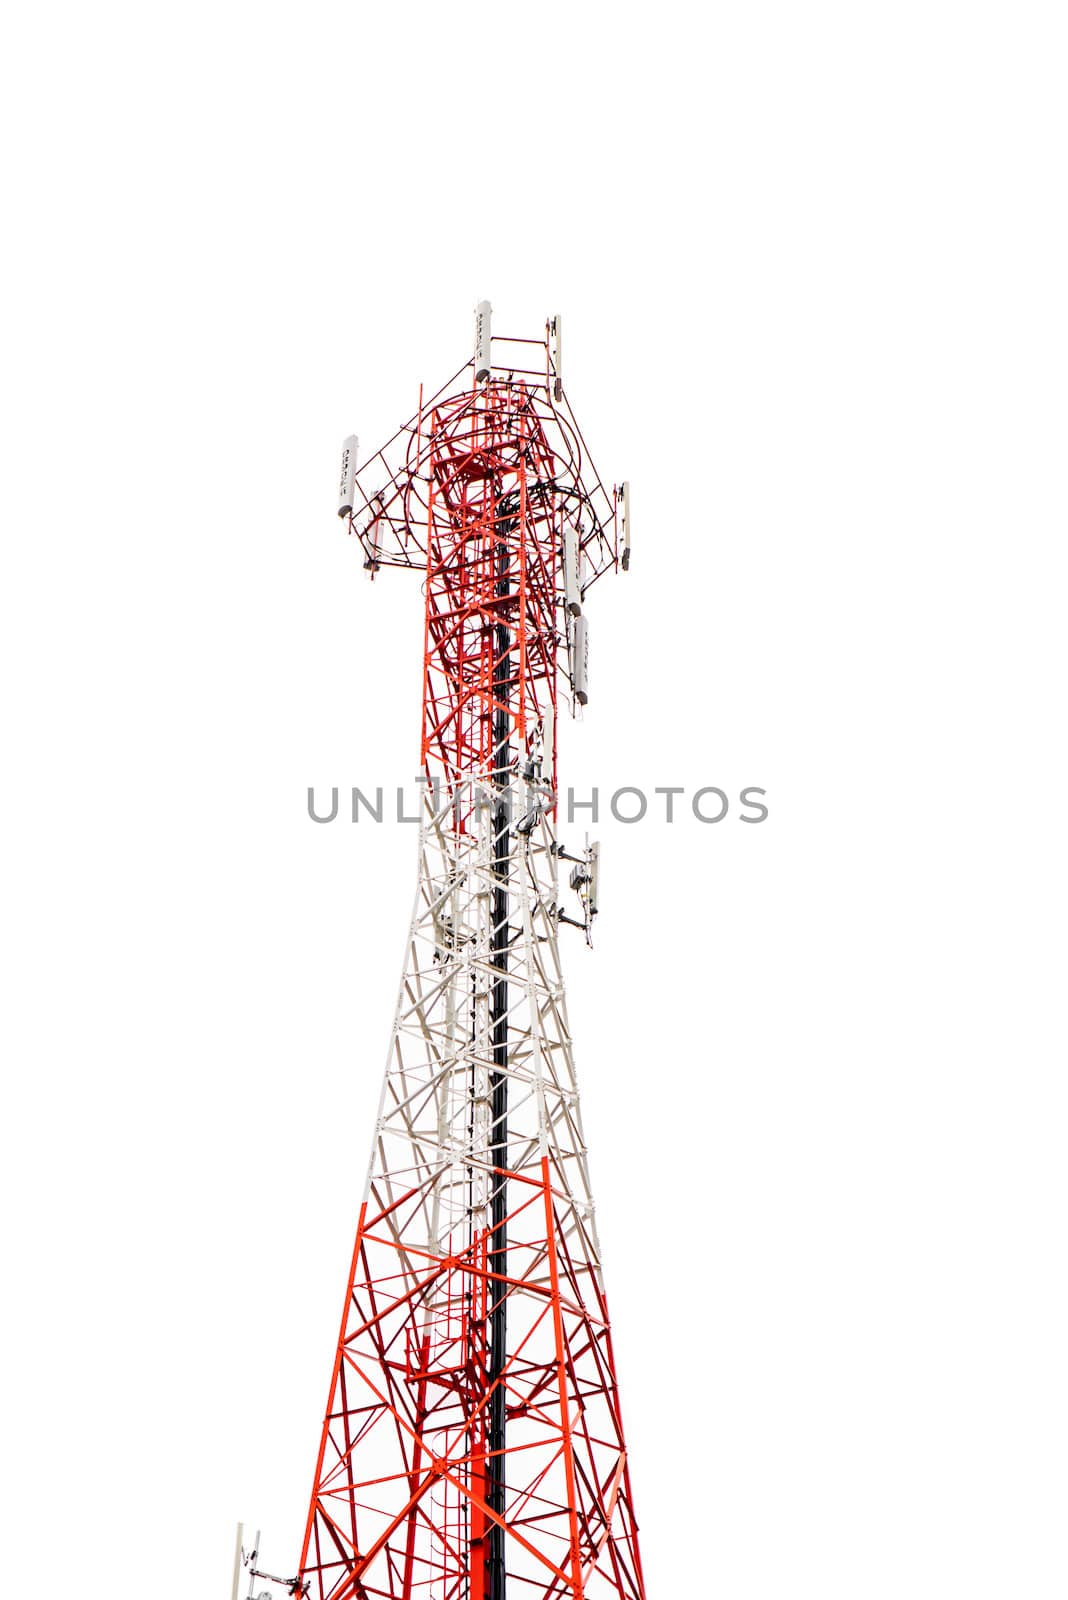 Mobile phone communication antenna tower  by wmitrmatr